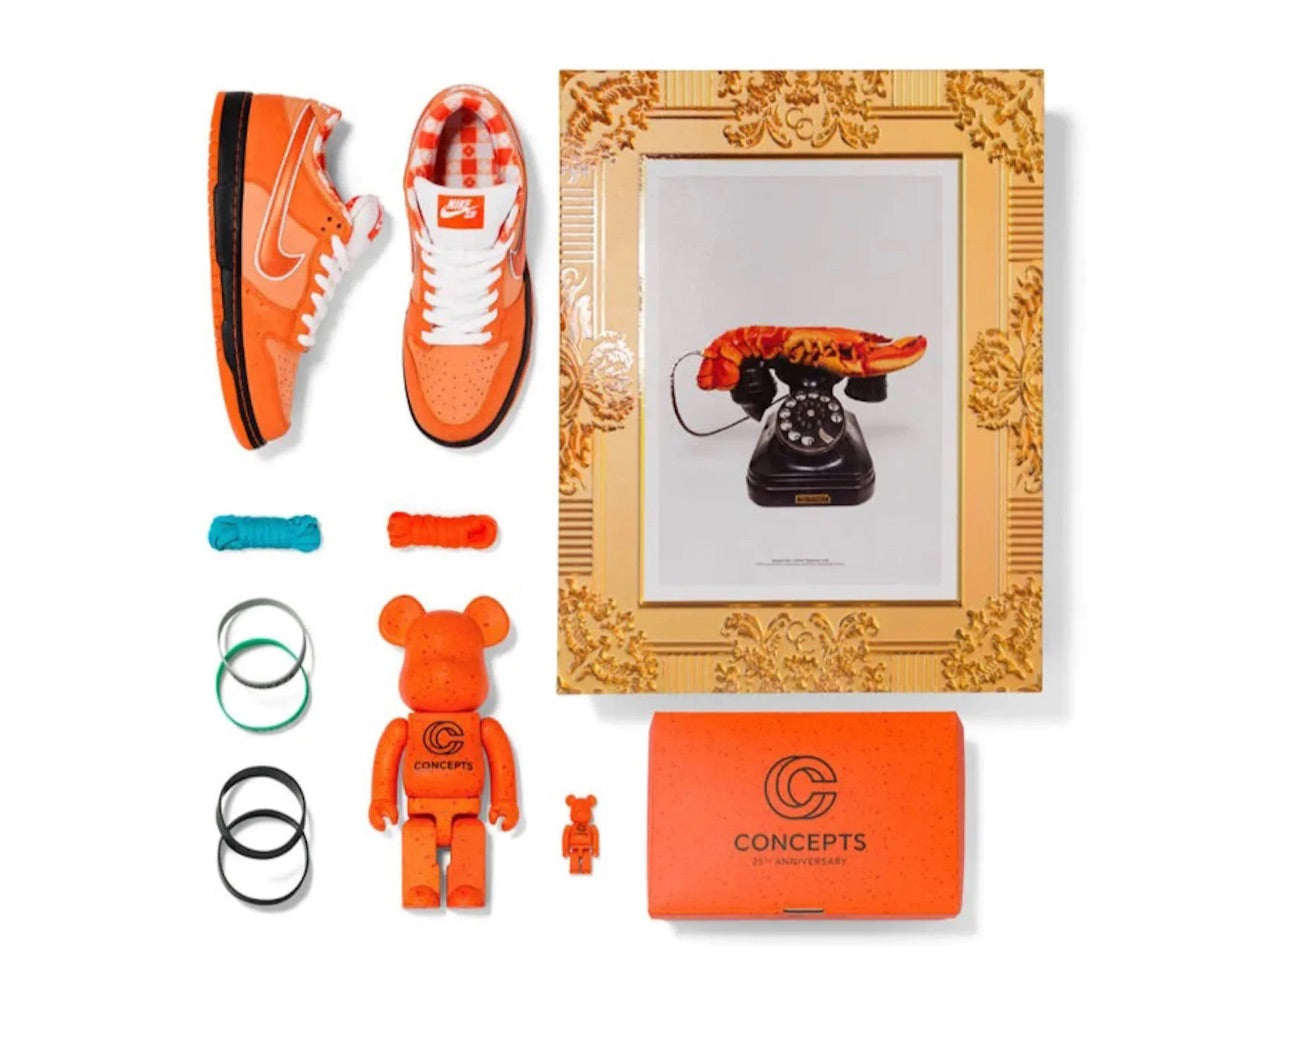 Nike SB Dunk Low “Concepts Orange Lobster” (Special Box) - FD8776 800